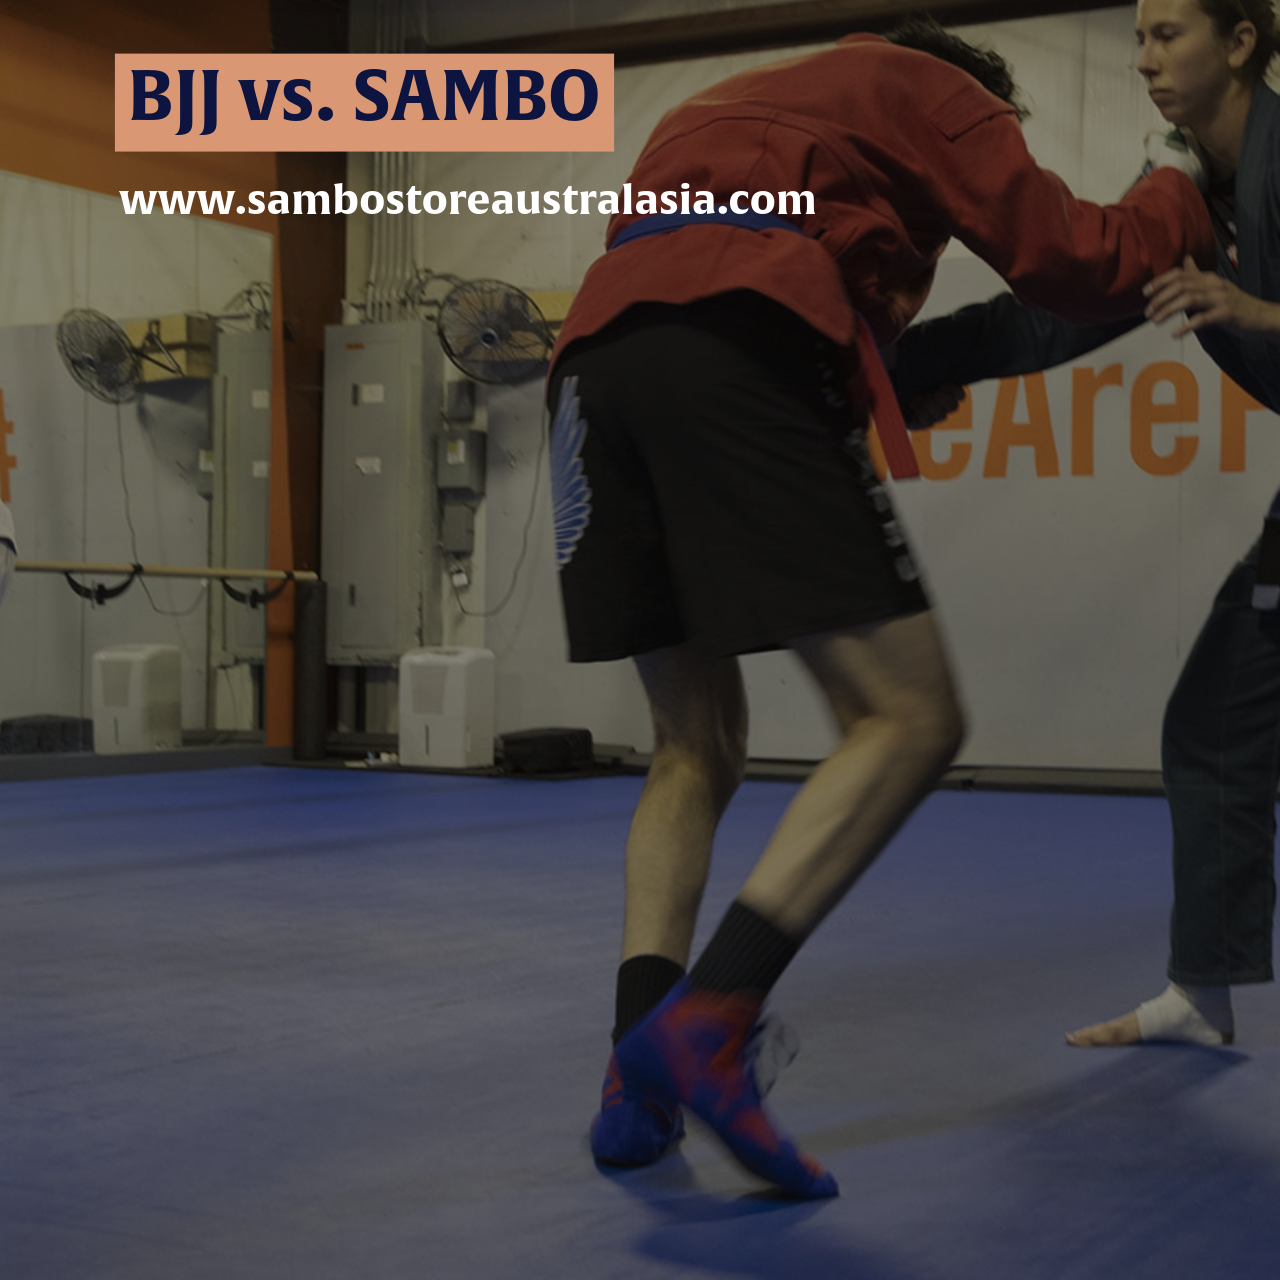 BJJ vs. SAMBO: Which Martial Art Is More Effective?